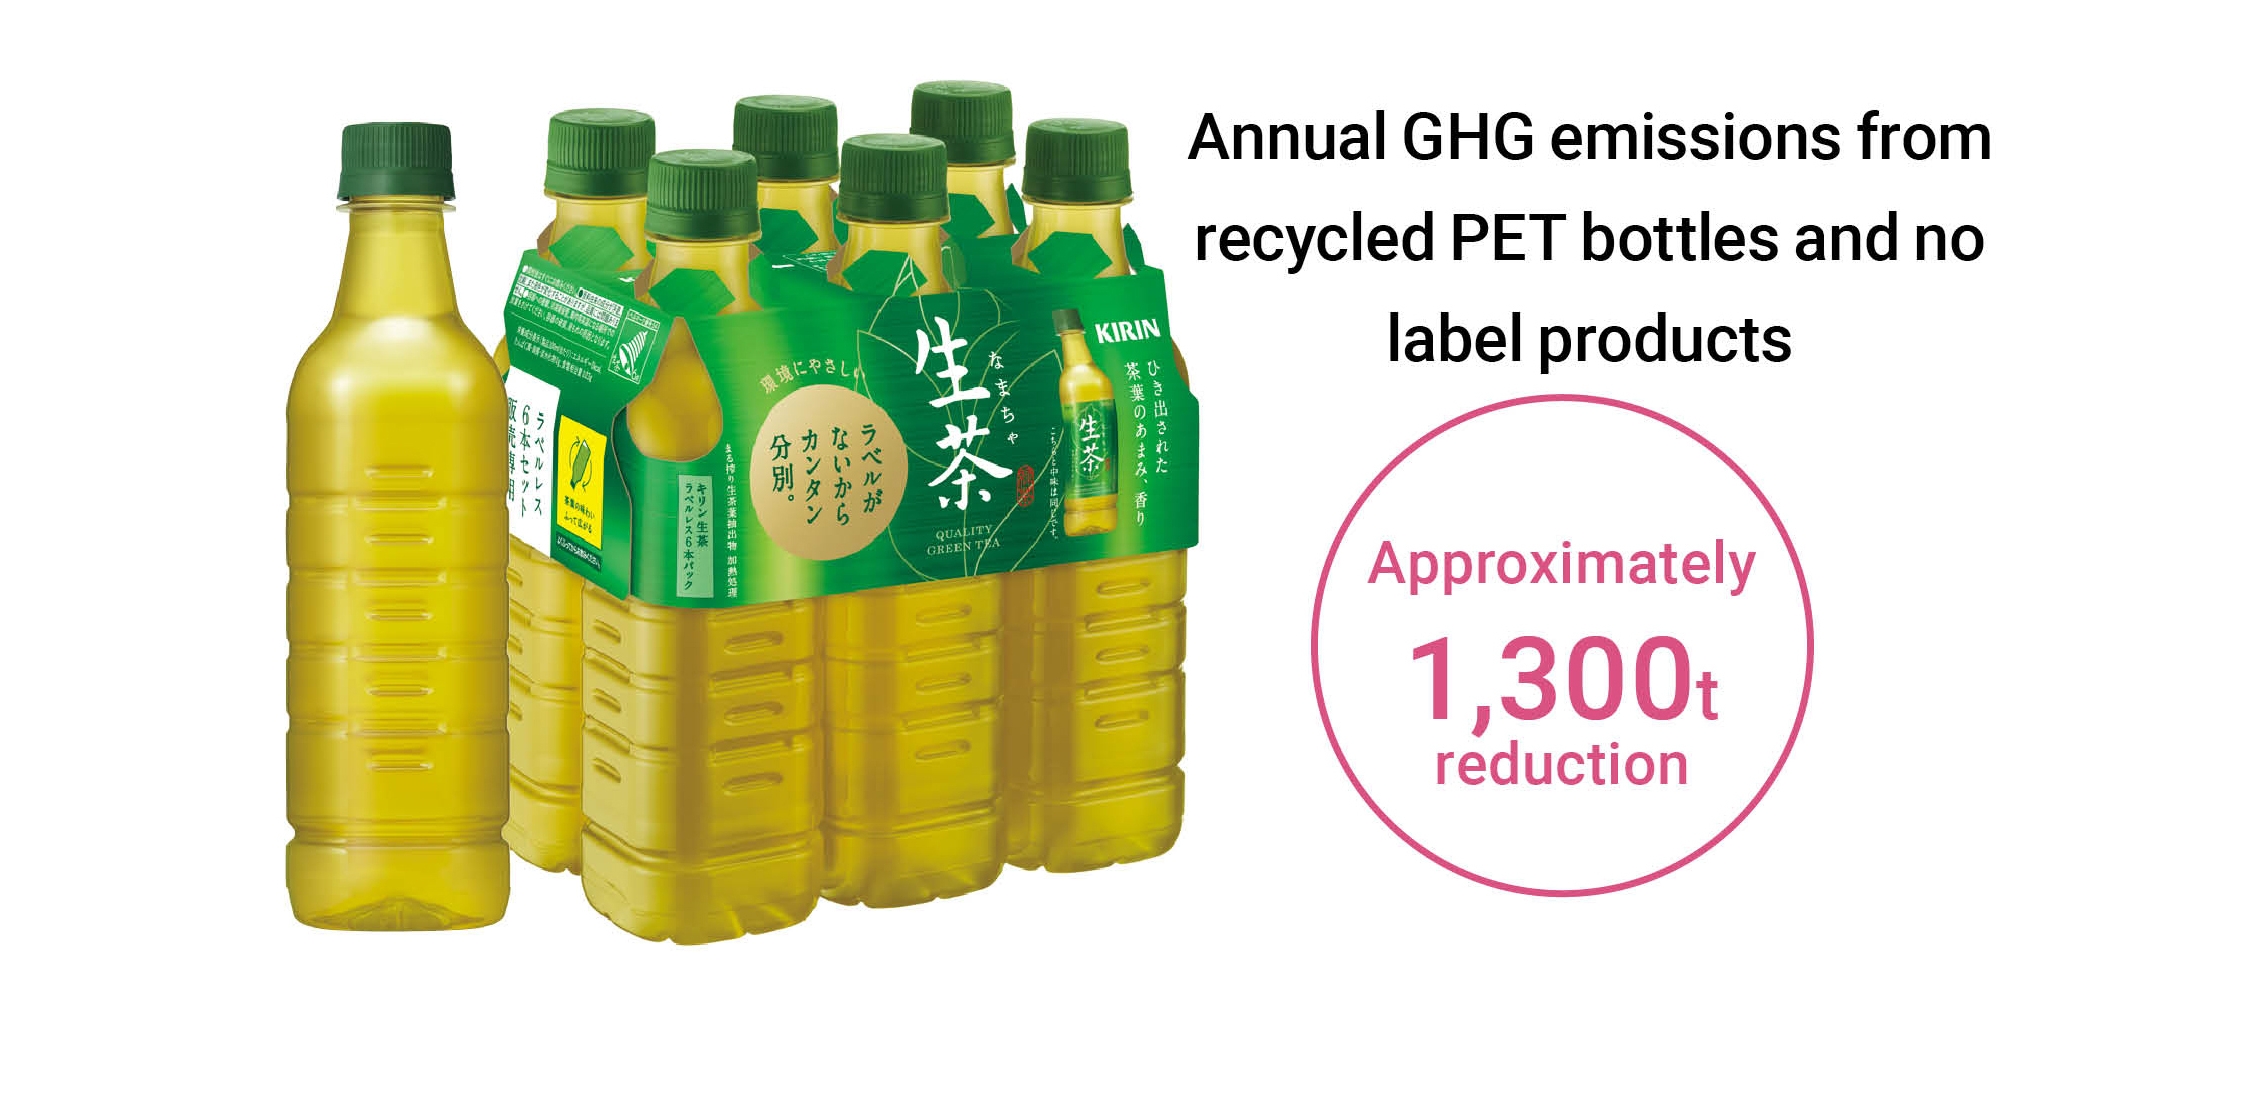 Annual GHG emissions from recycled PET bottles and no label products